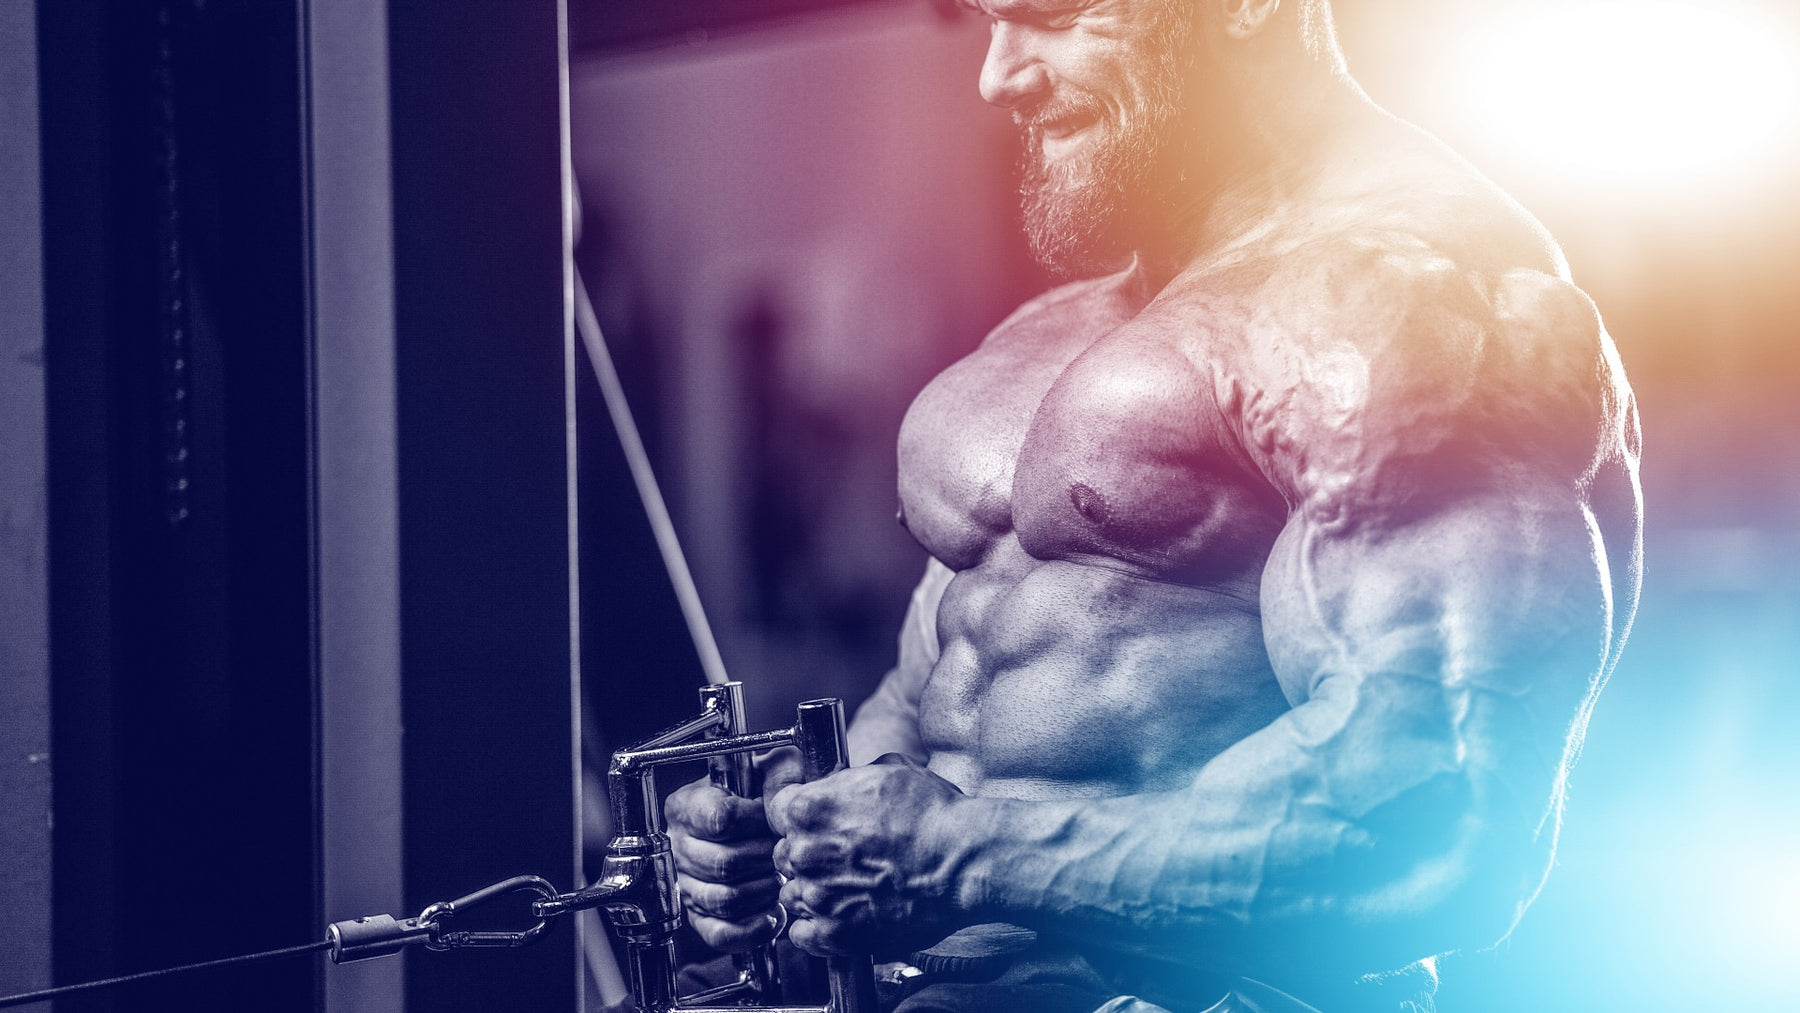 Cerberus Training - The 3-Headed Muscle Building Workout System